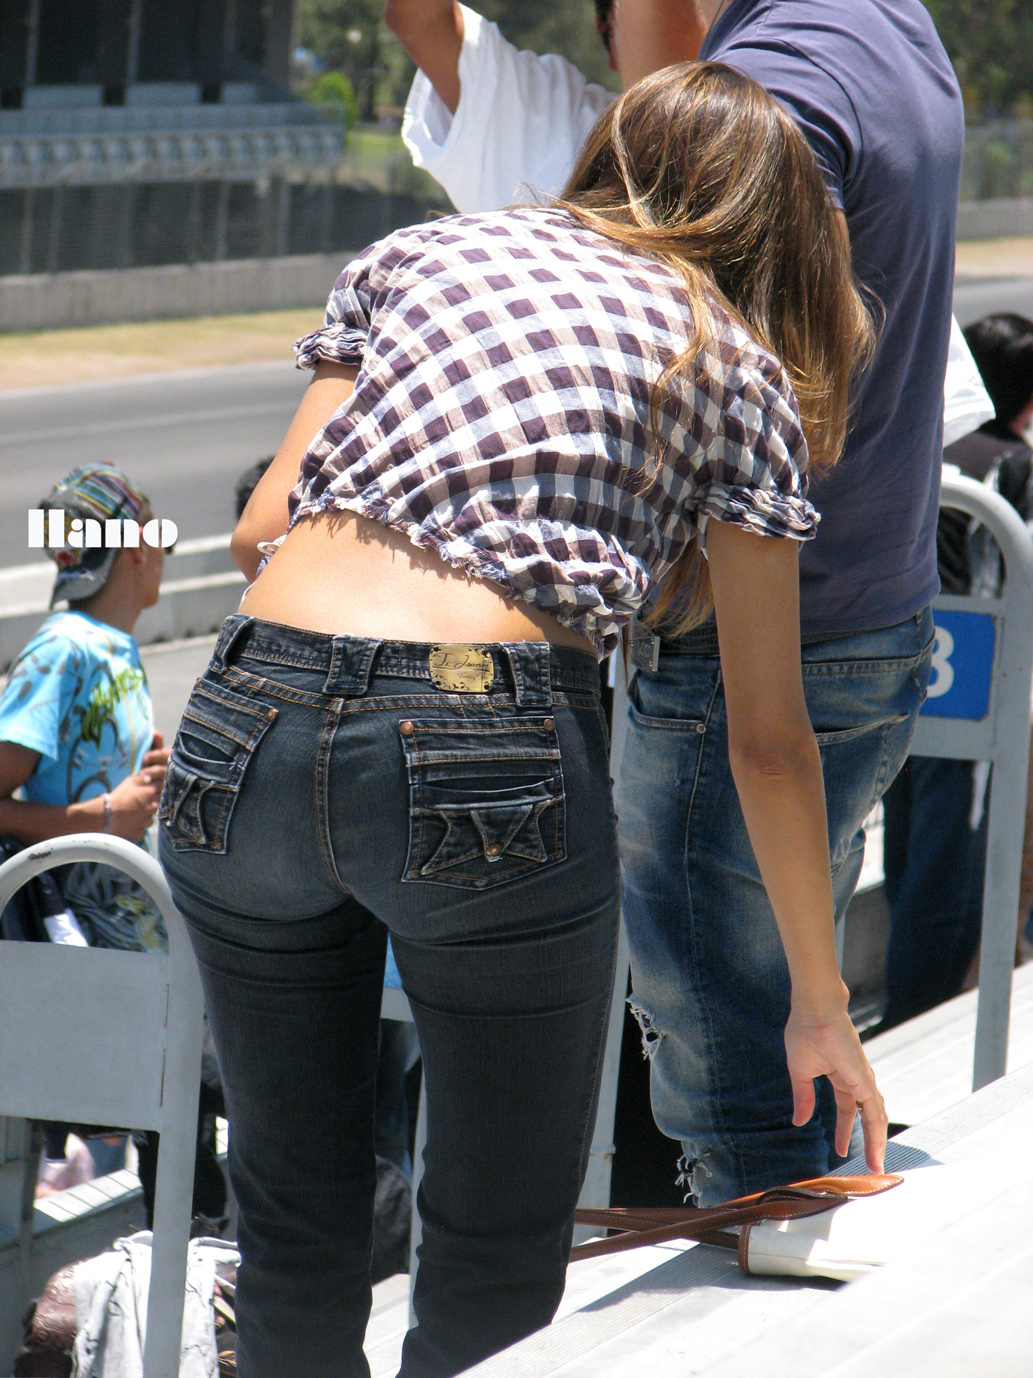 tight Girl butt jeans in